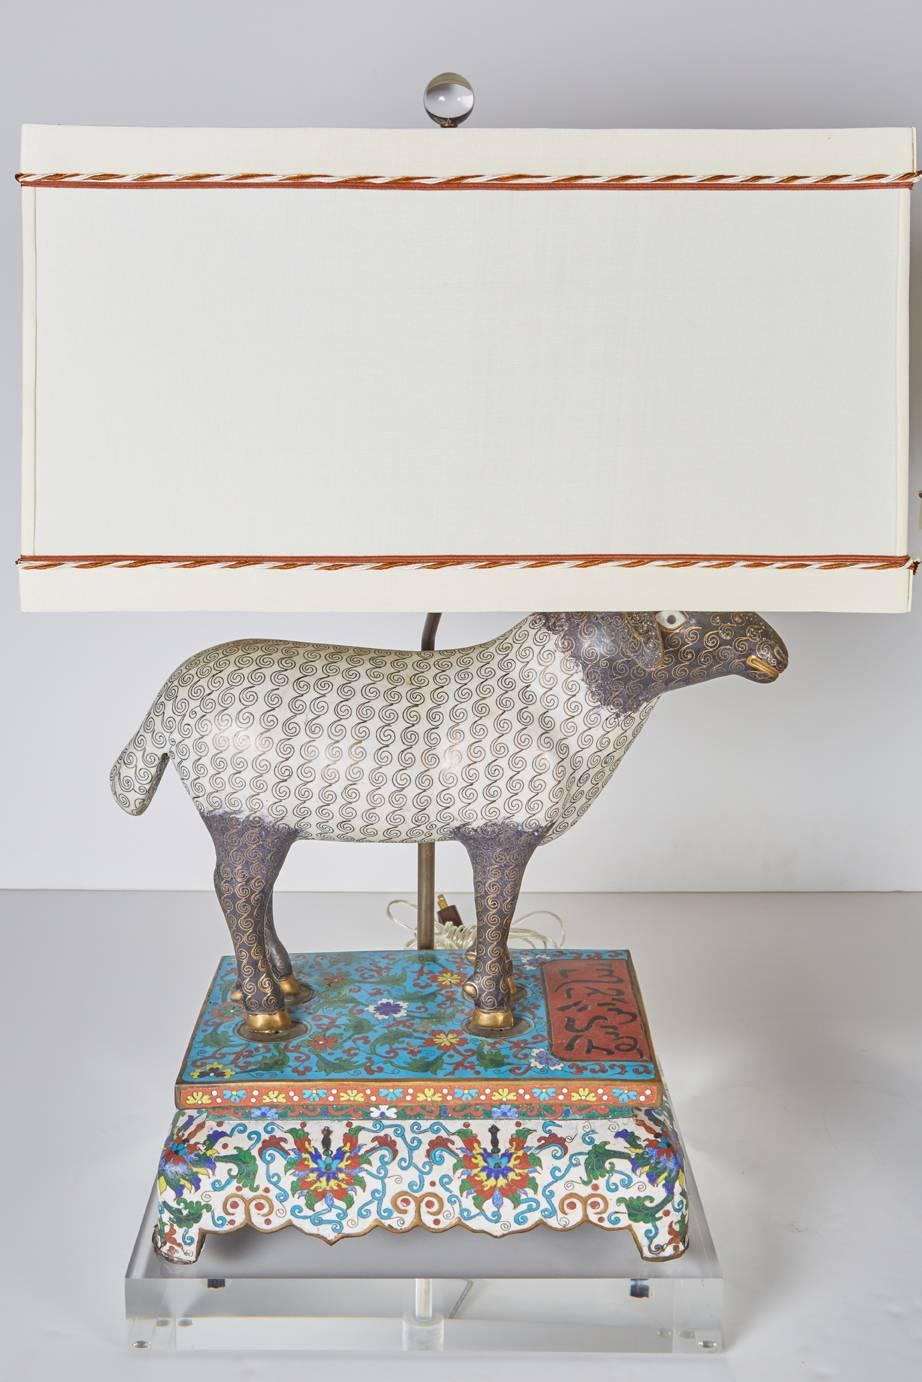 Antique Chinese cloisonné lambs on cloisonné bases bearing Arabic calligraphy and probably made for the Arabic market. Newly mounted on thick, custom Lucite bases with custom, off-white silk shades trimmed in brown and white twisted cord.